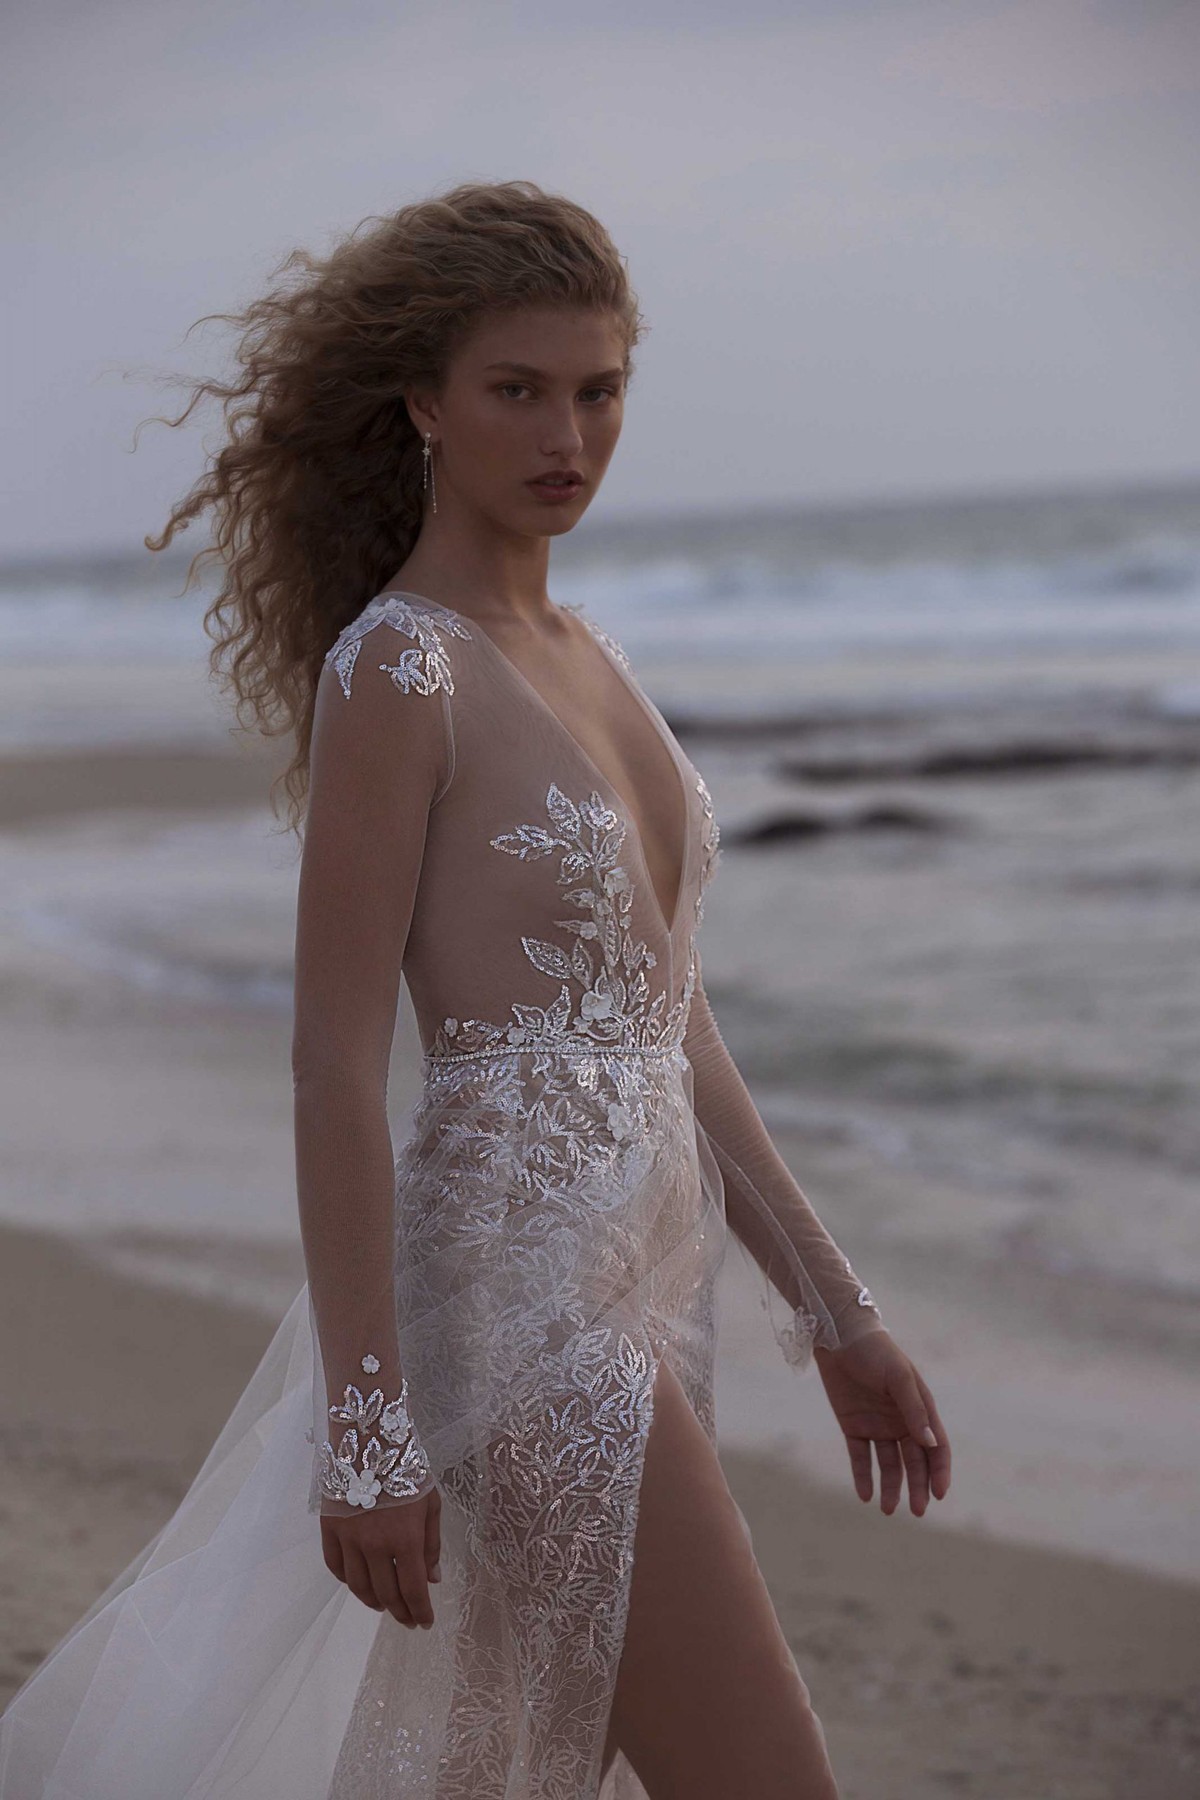 21-HARRIETT Bridal Dress Inspirated By Berta Muse 2021 Vista Mare Collection